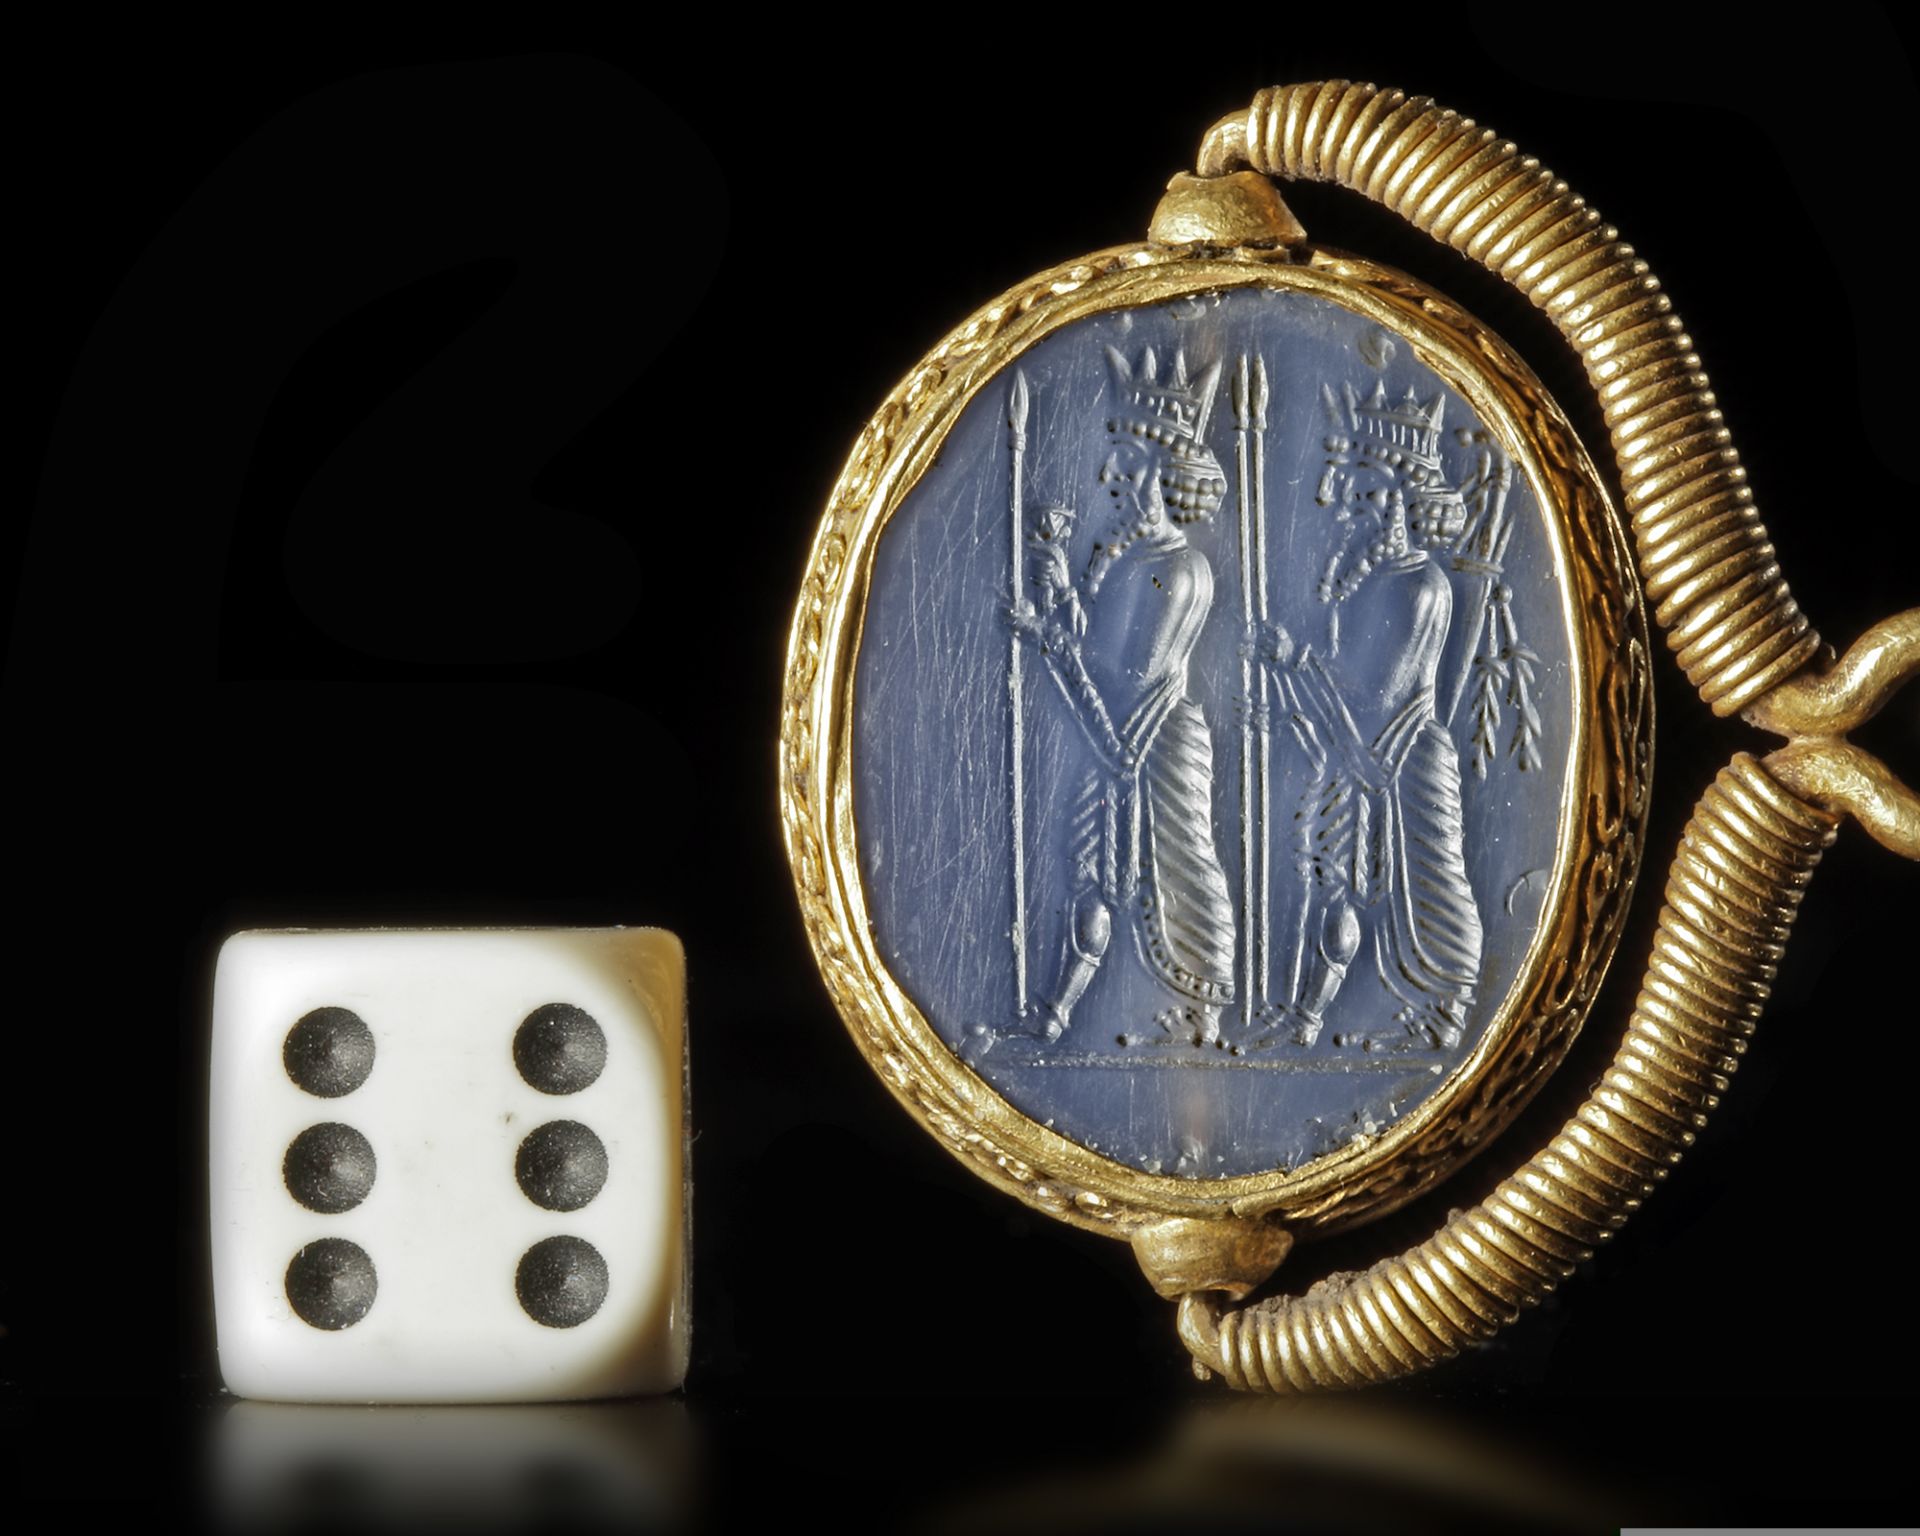 AN ACHAEMENID BLUE CHALCEDONY SEAL IN GOLD MOUNT, 5TH CENTURY BC - Image 5 of 5